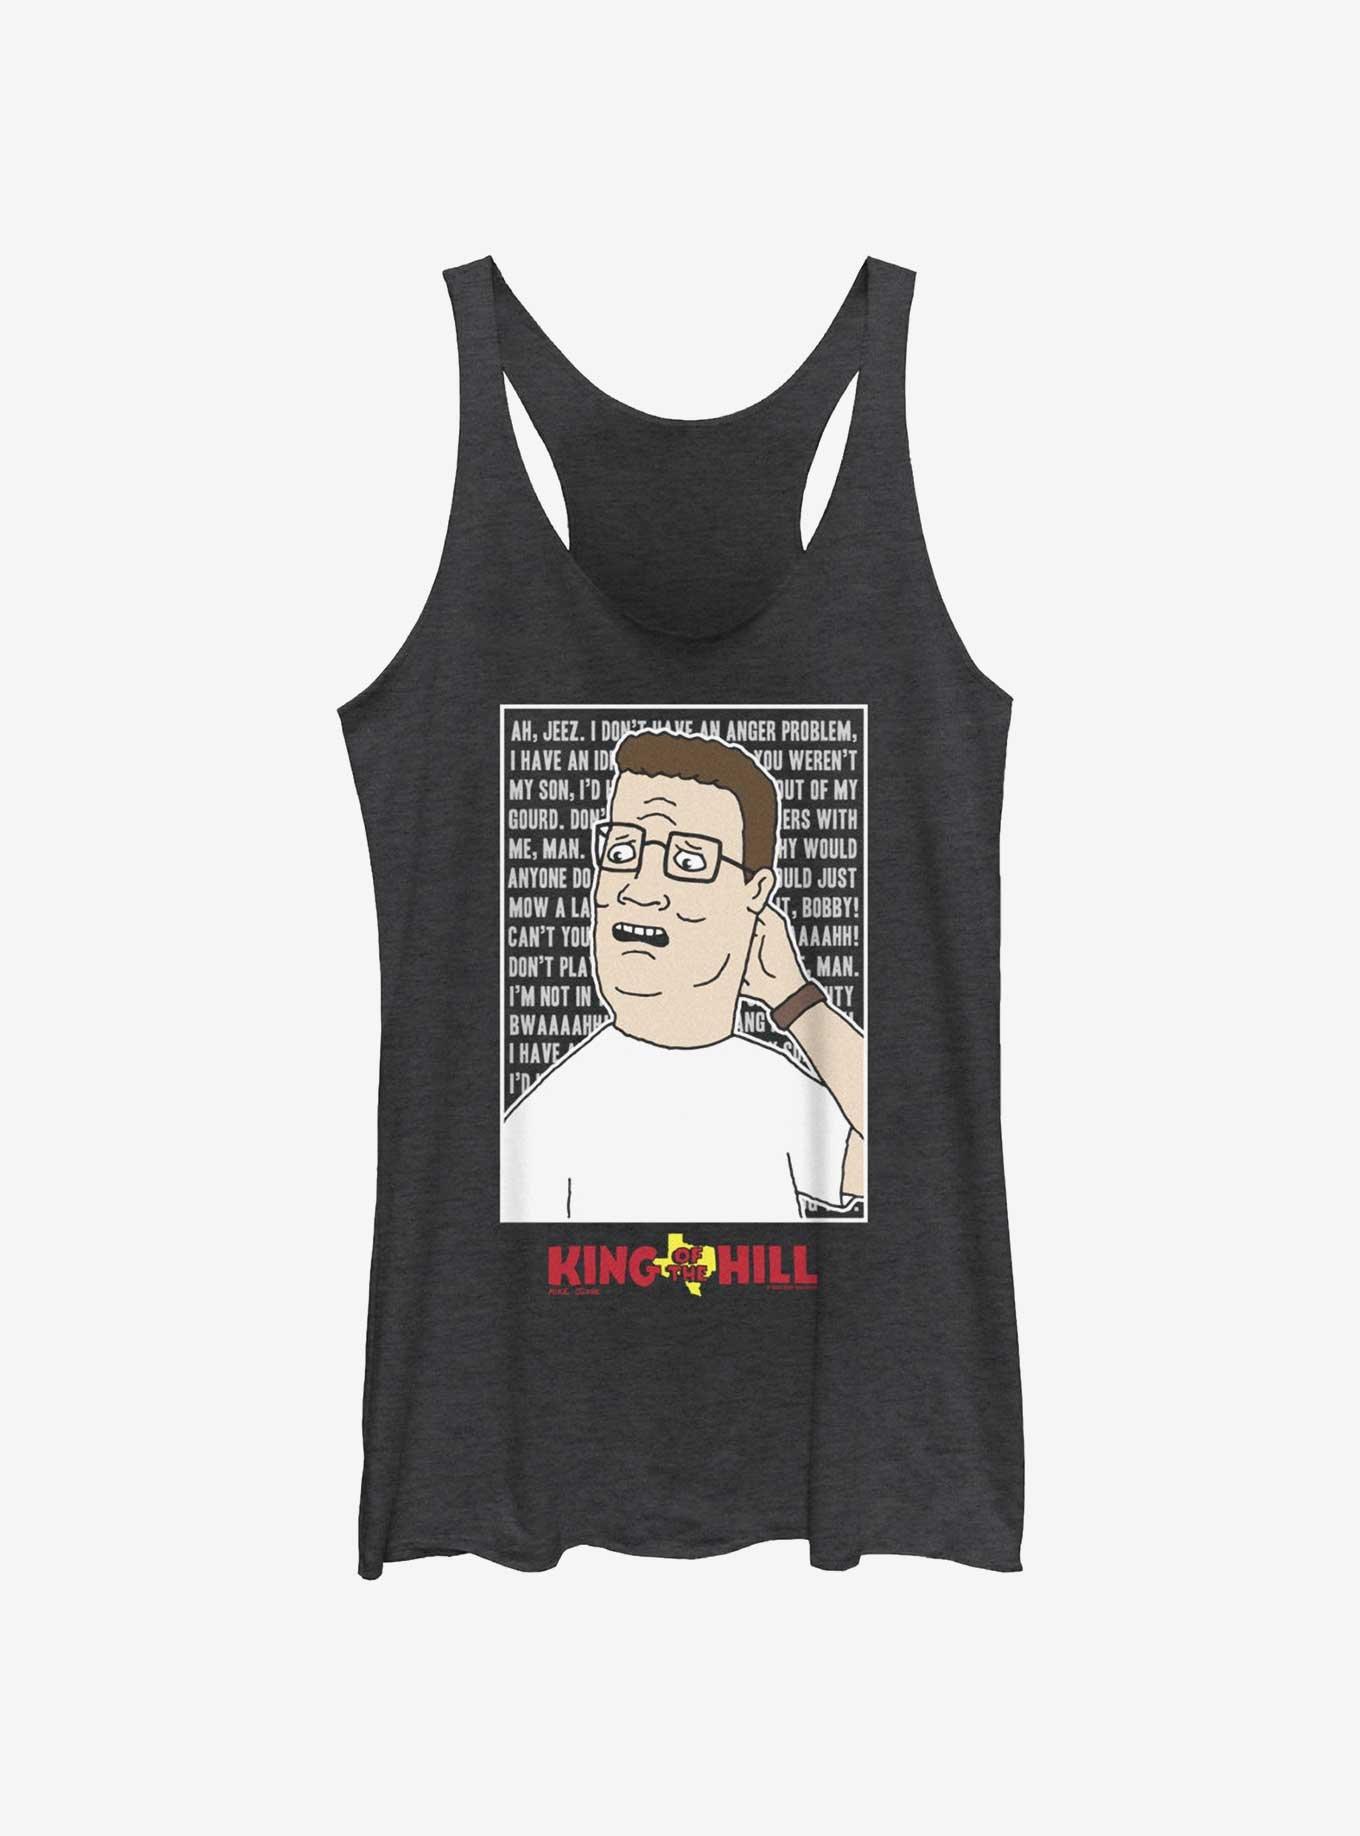 King of the Hill Hank Hill Quote Box Girls Tank, BLK HTR, hi-res